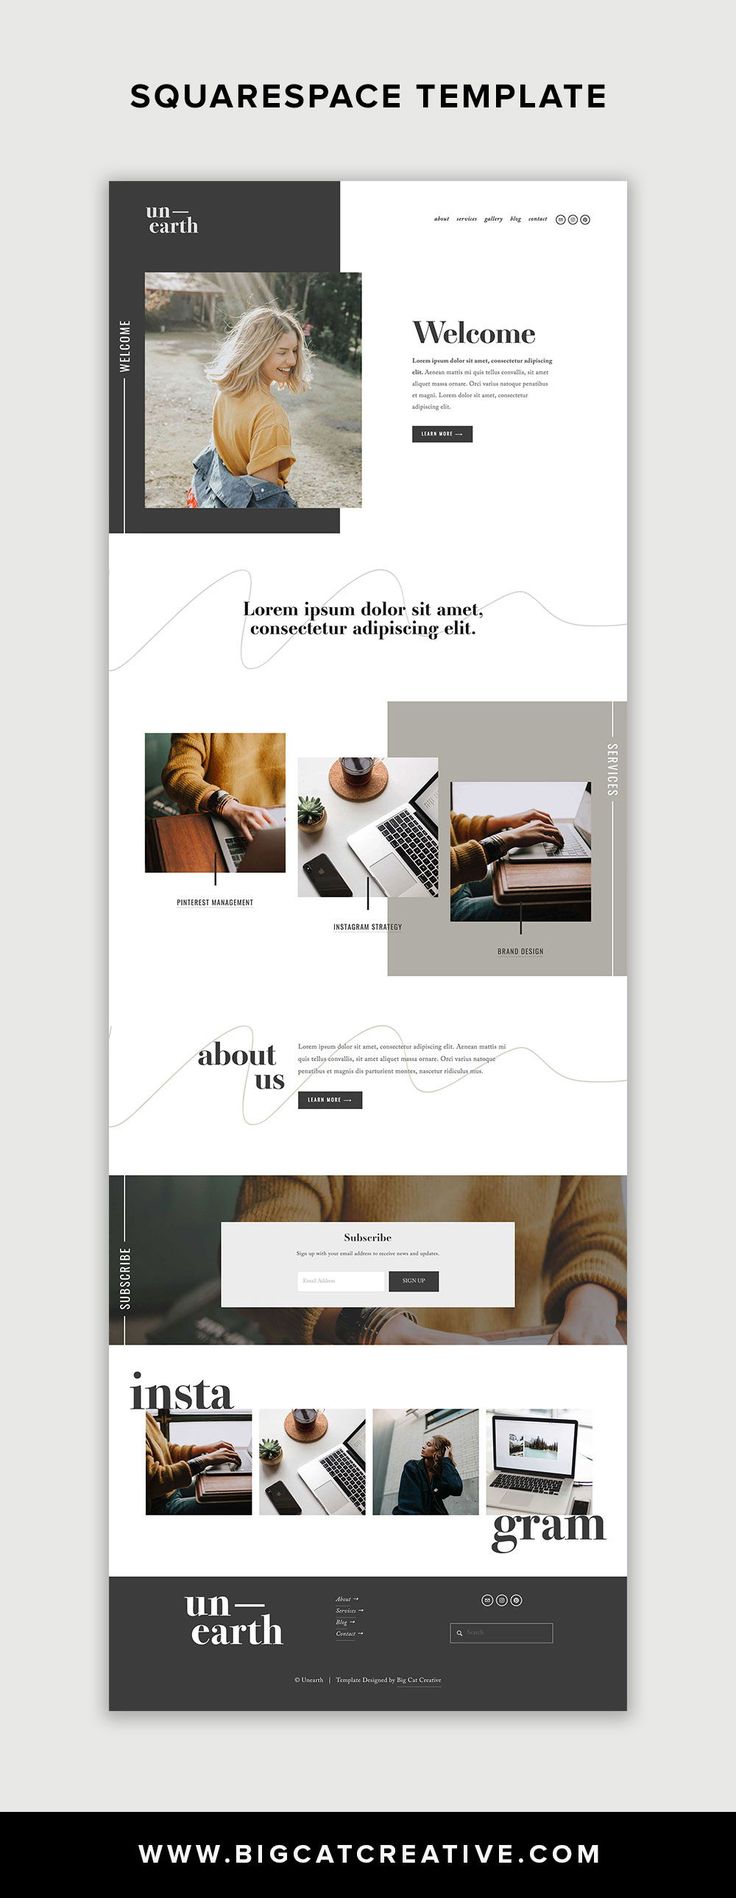 Unearth Squarespace Template is a modern and artistic website template that is p...